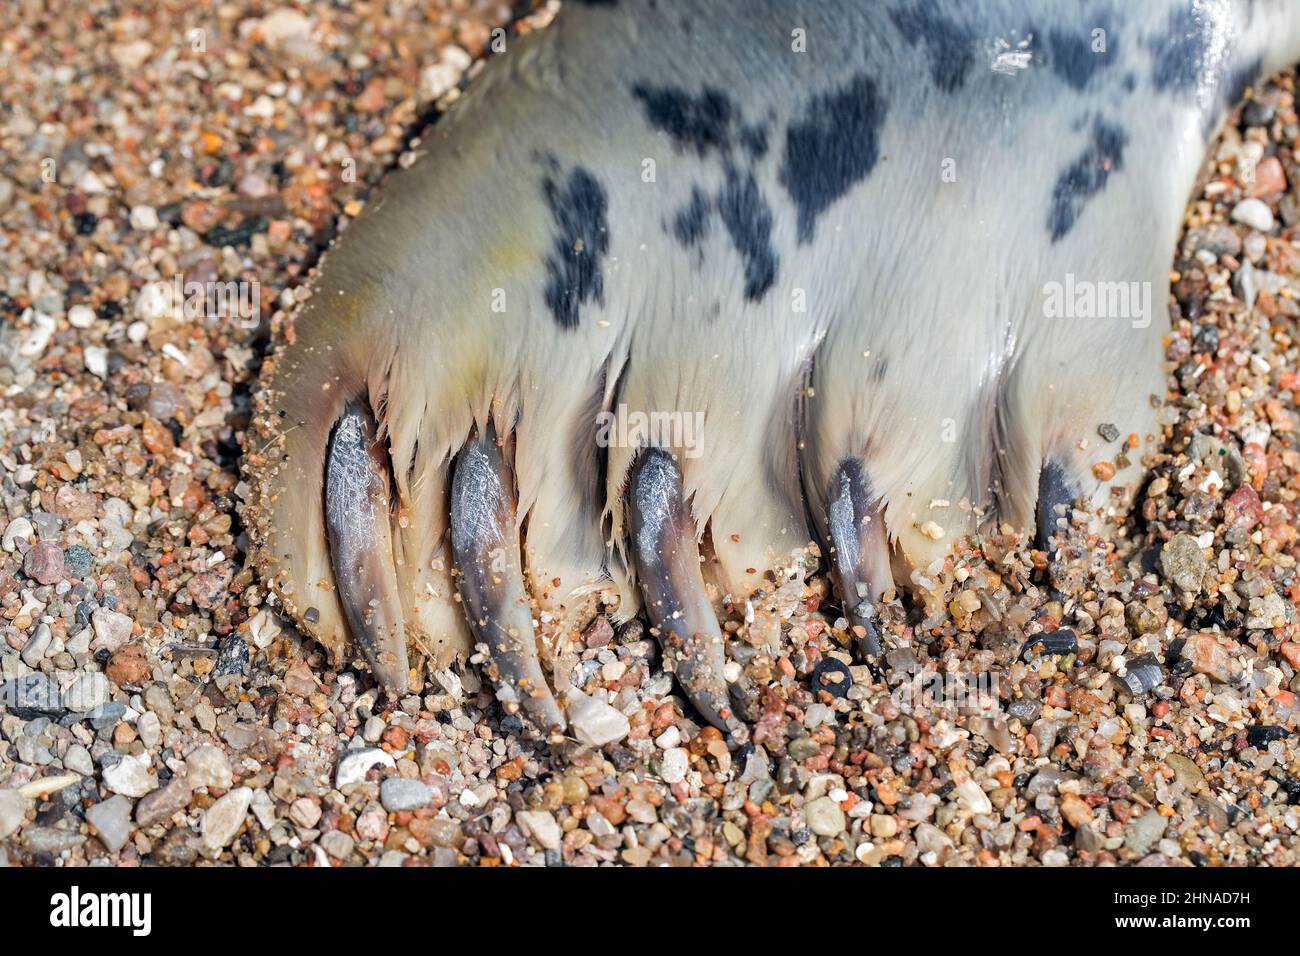 Grey seal / gray seal (Halichoerus grypus) close-up of webbed fore flipper with claws on the beach Stock Photo